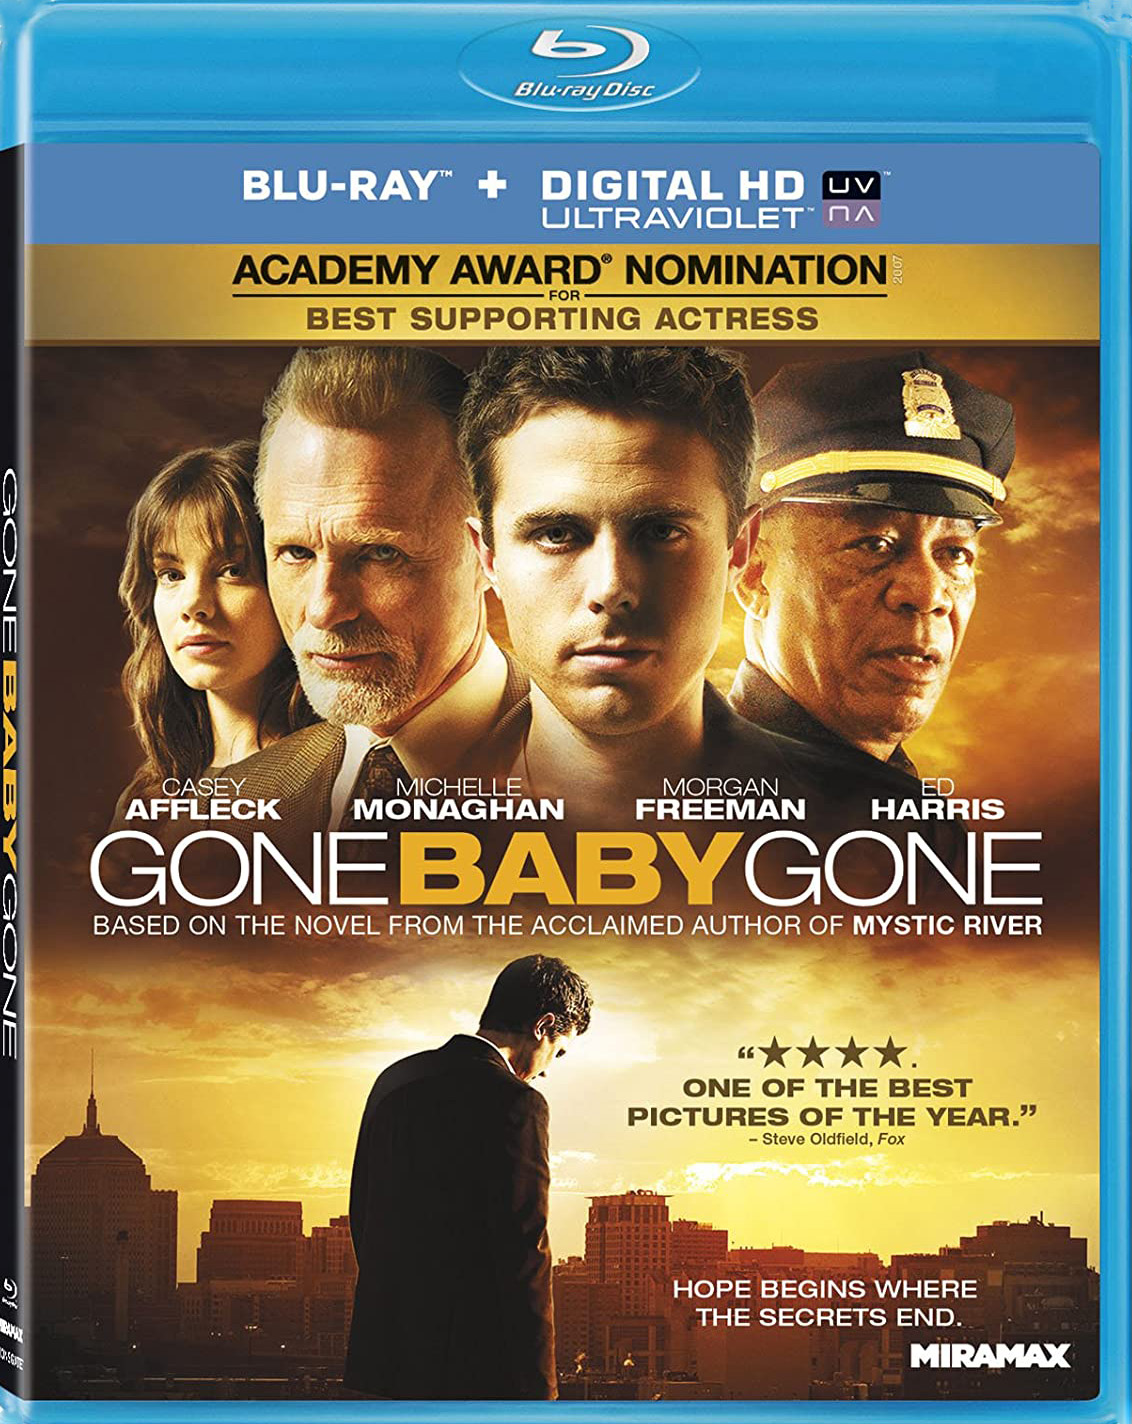 Gone Baby Gone (2007) BluRay 1080p PCM AC3 x264 NL-RetailSub REMUX REPOST